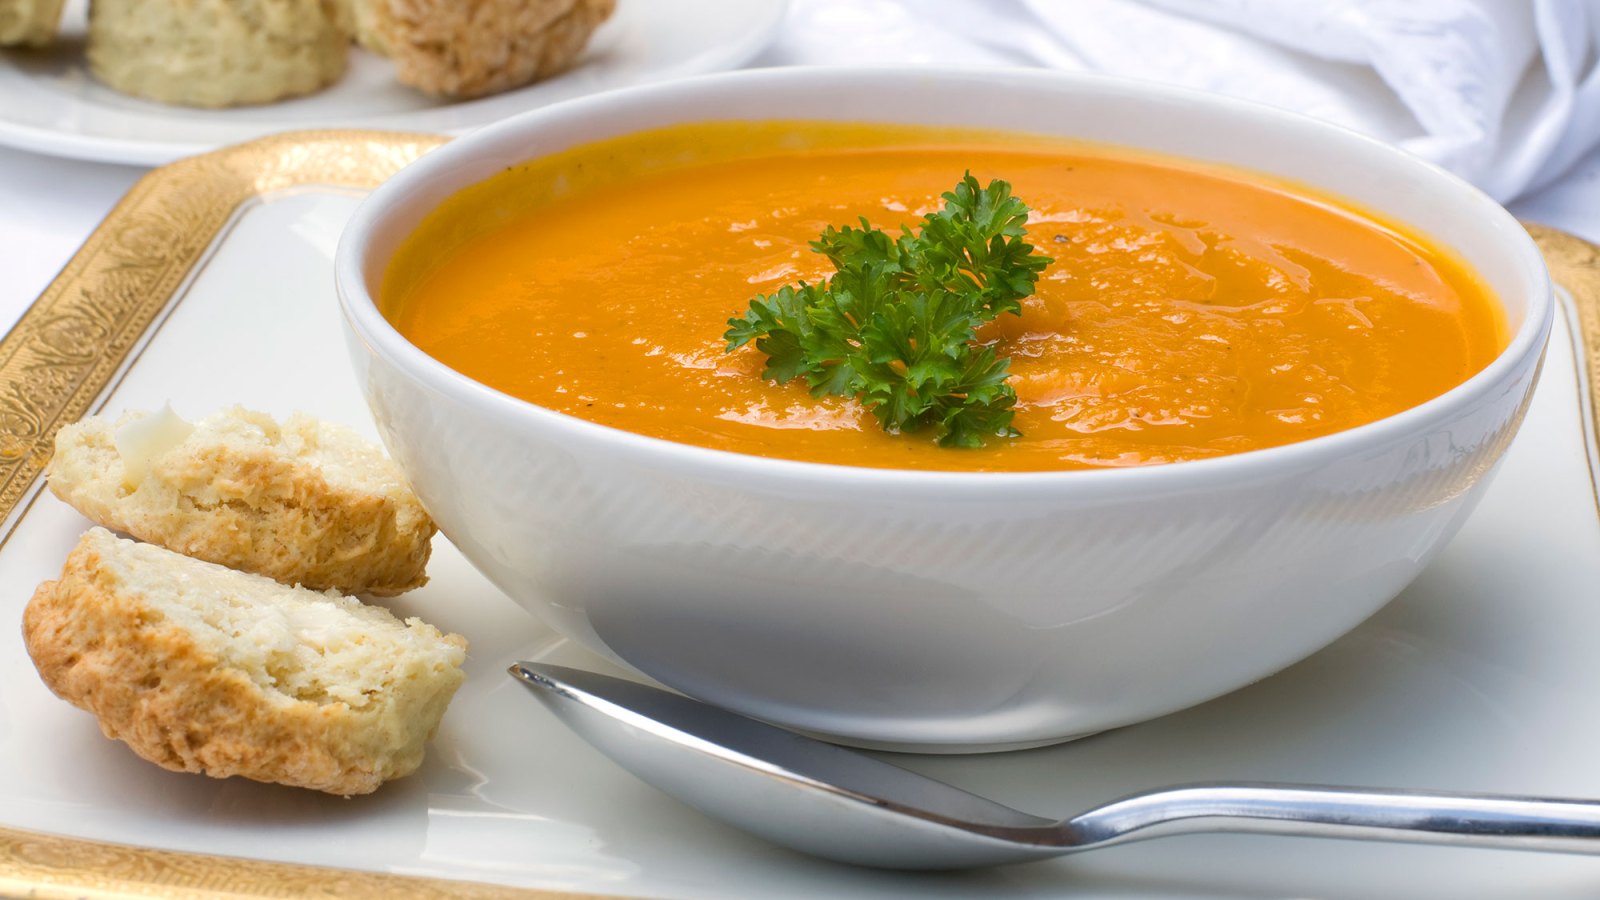 Warm Up With This Curried Butternut Squash and Apple Soup Recipe